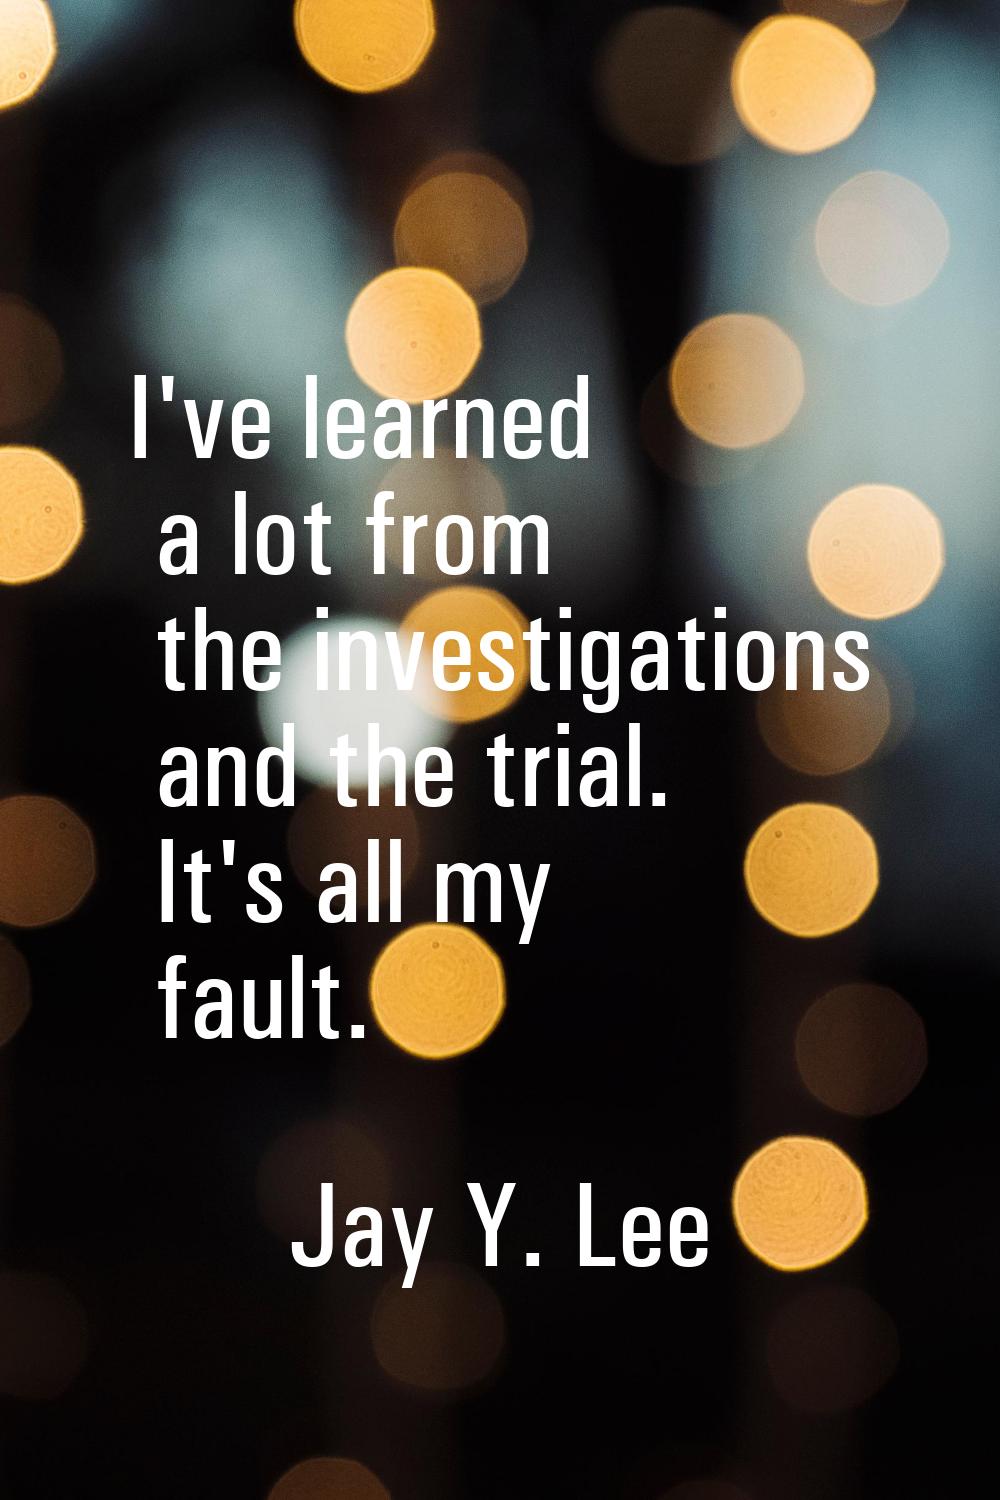 I've learned a lot from the investigations and the trial. It's all my fault.